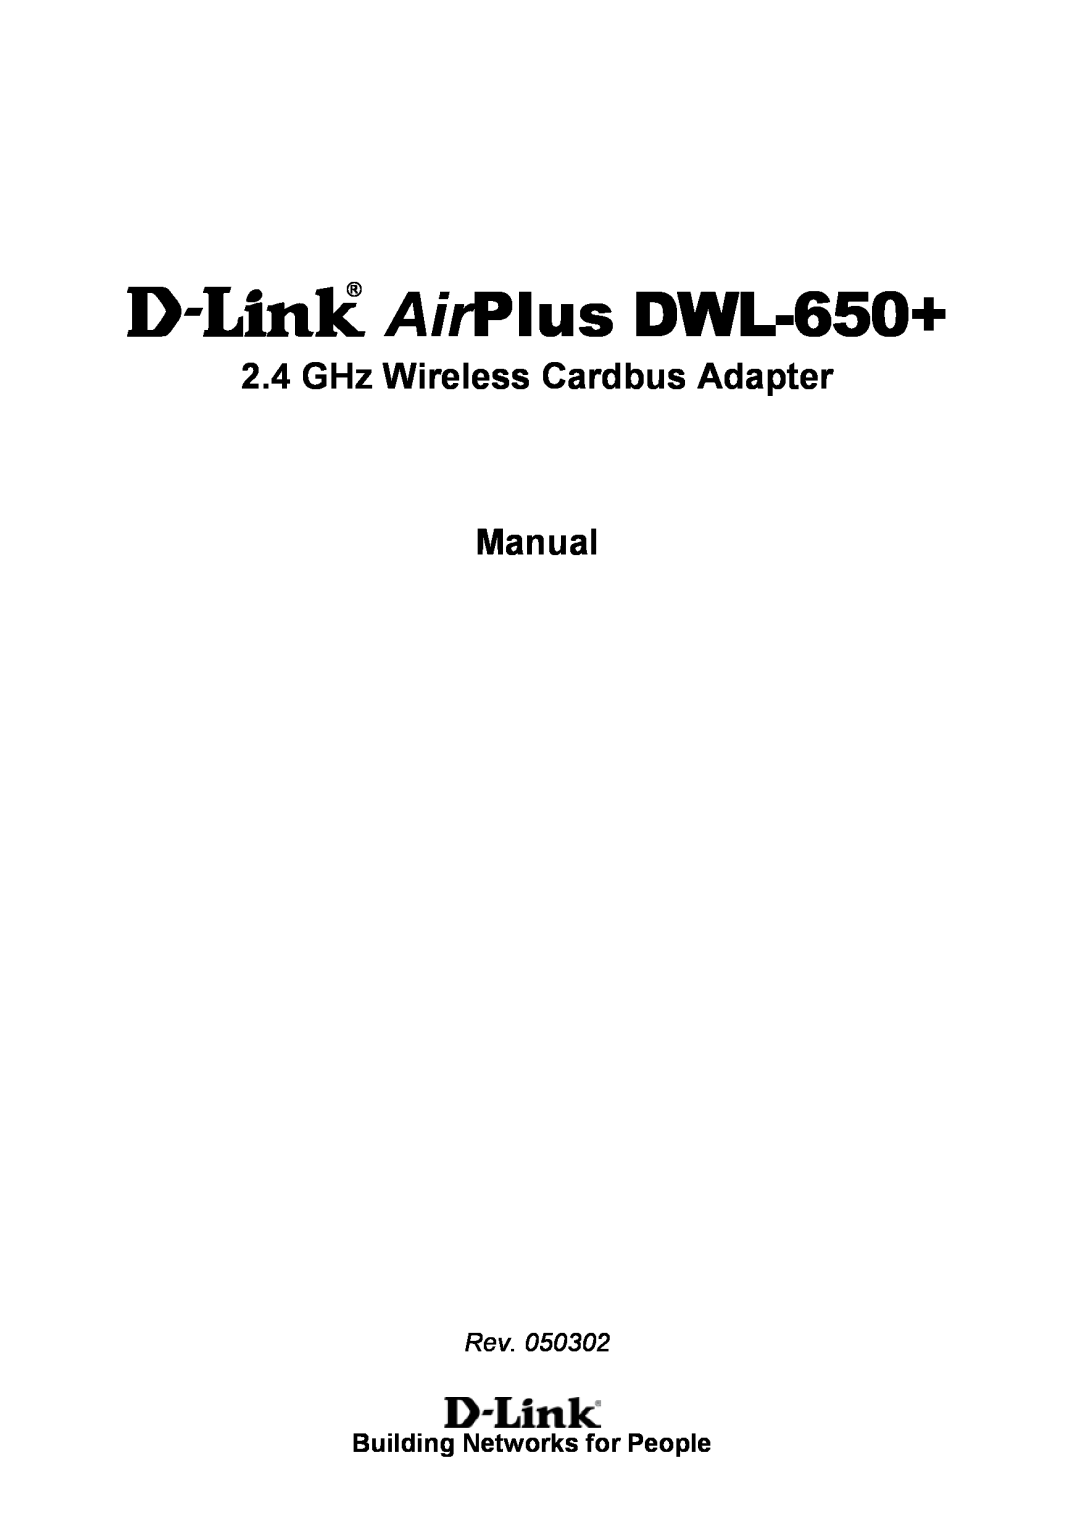 D-Link manual GHz Wireless Cardbus Adapter Manual, D-Link AirPlus DWL-650+, Building Networks for People 